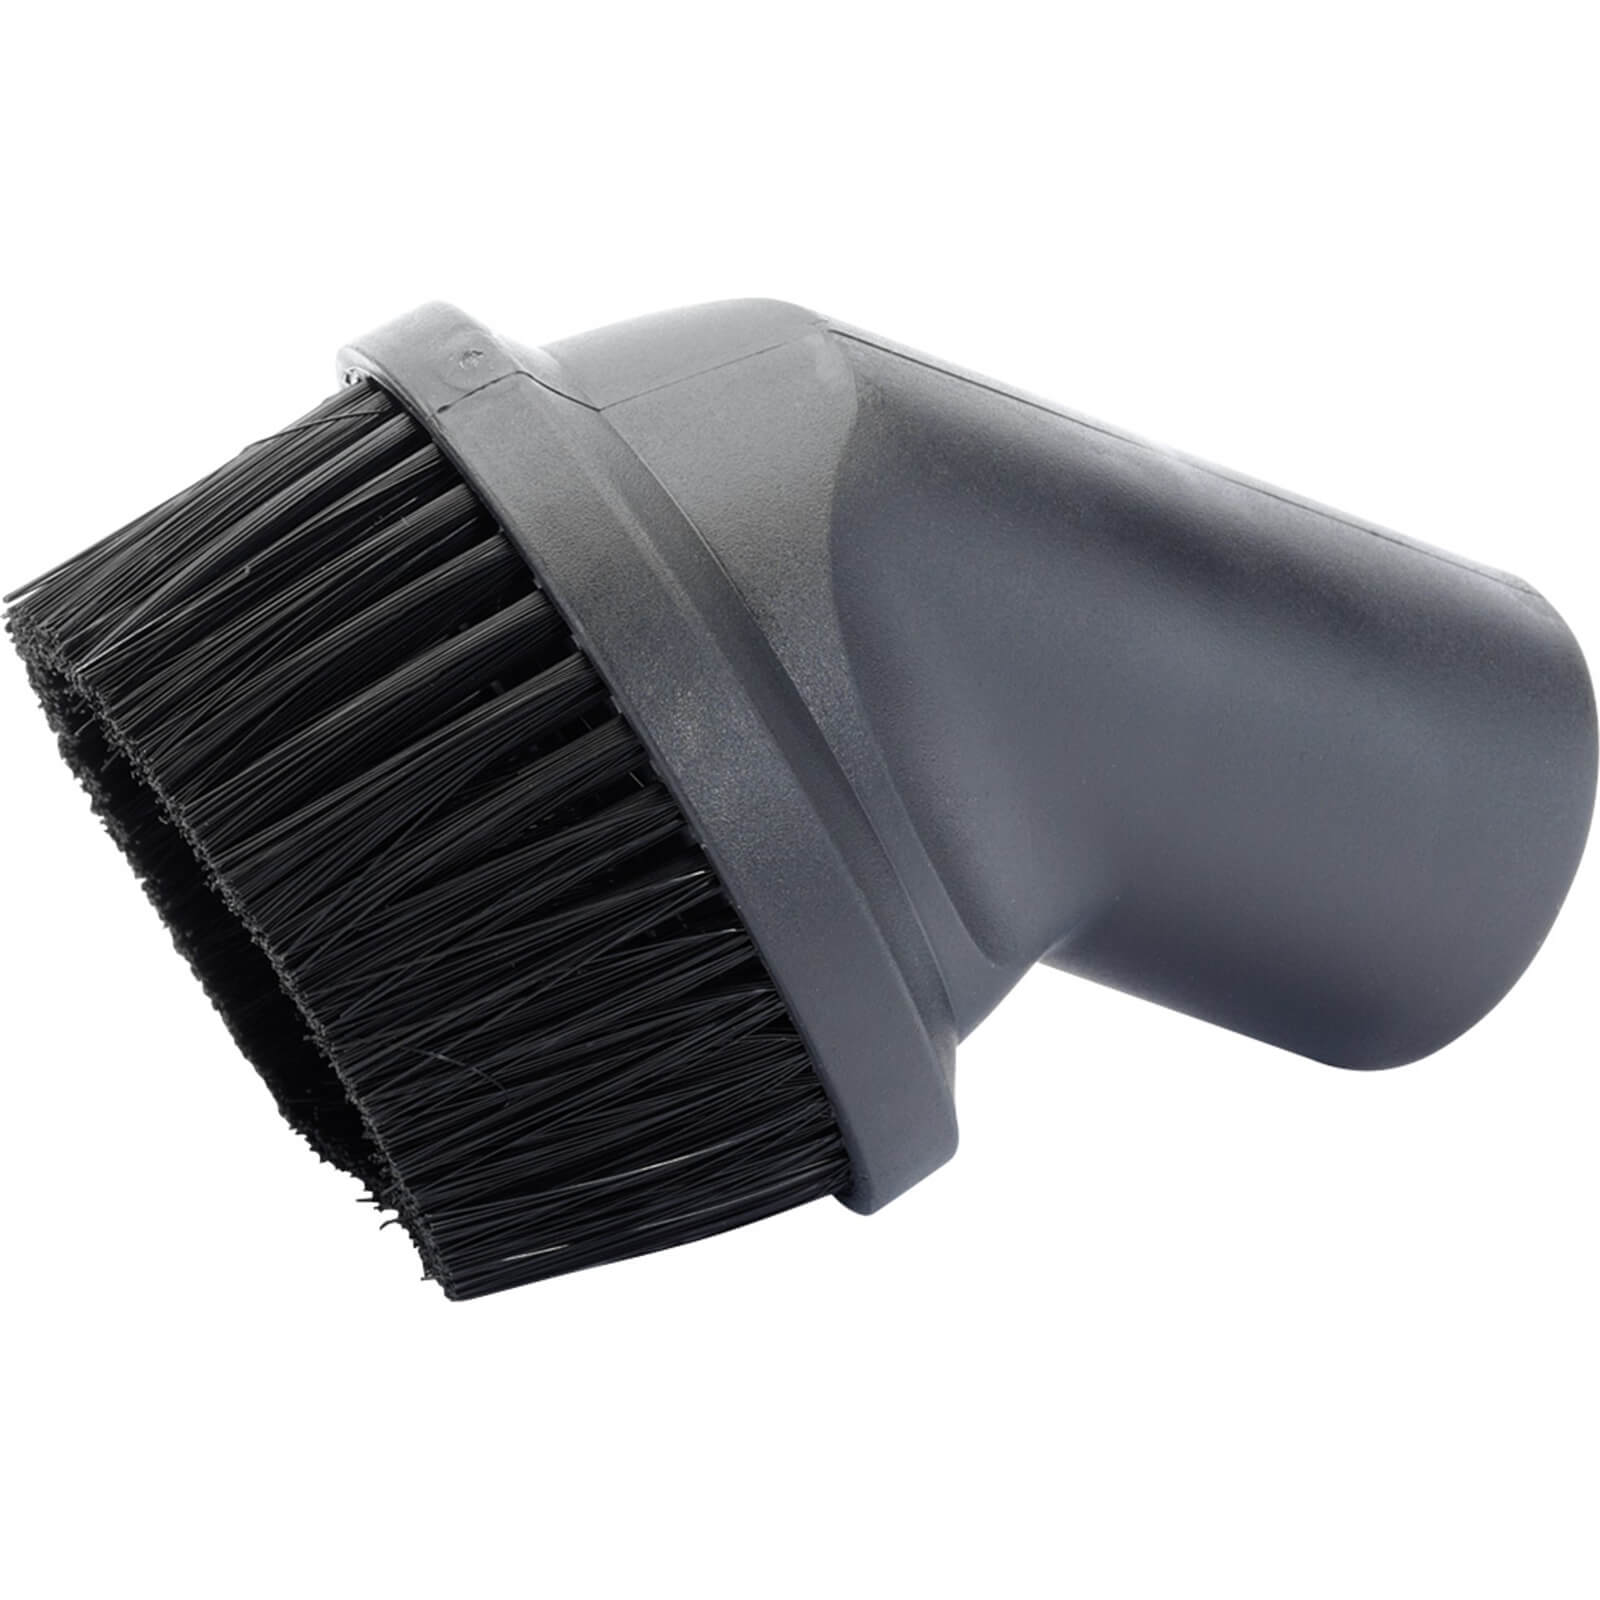 Image of Draper Brush Nozzle for 08101, 48497, 48498 and 48499 Vacuum Cleaners